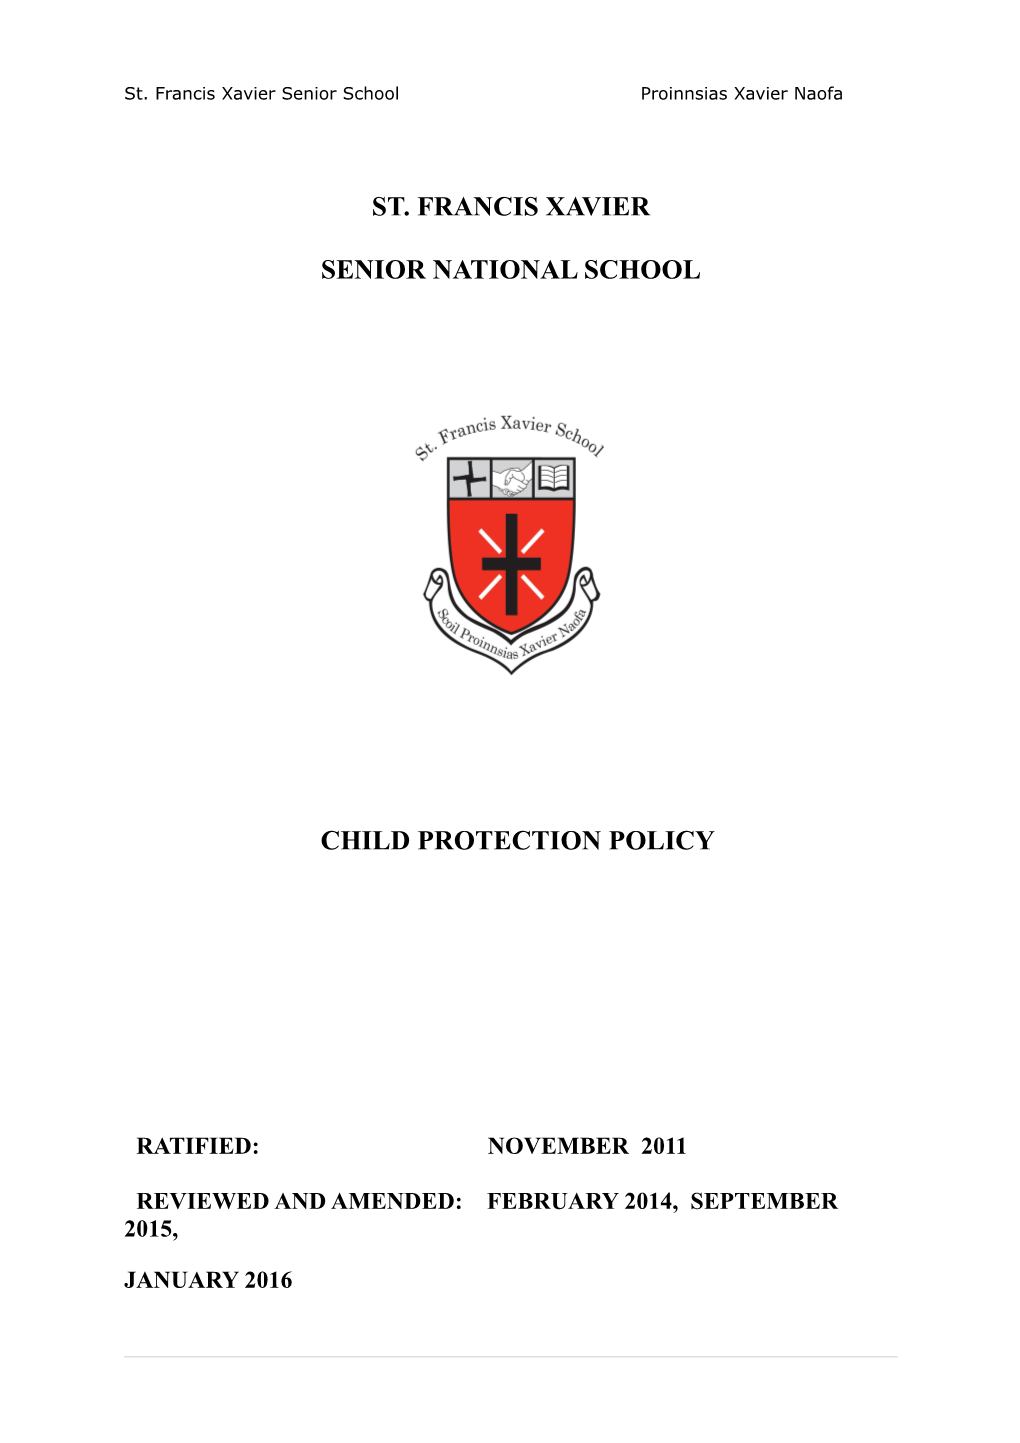 Child Protection Policy s16